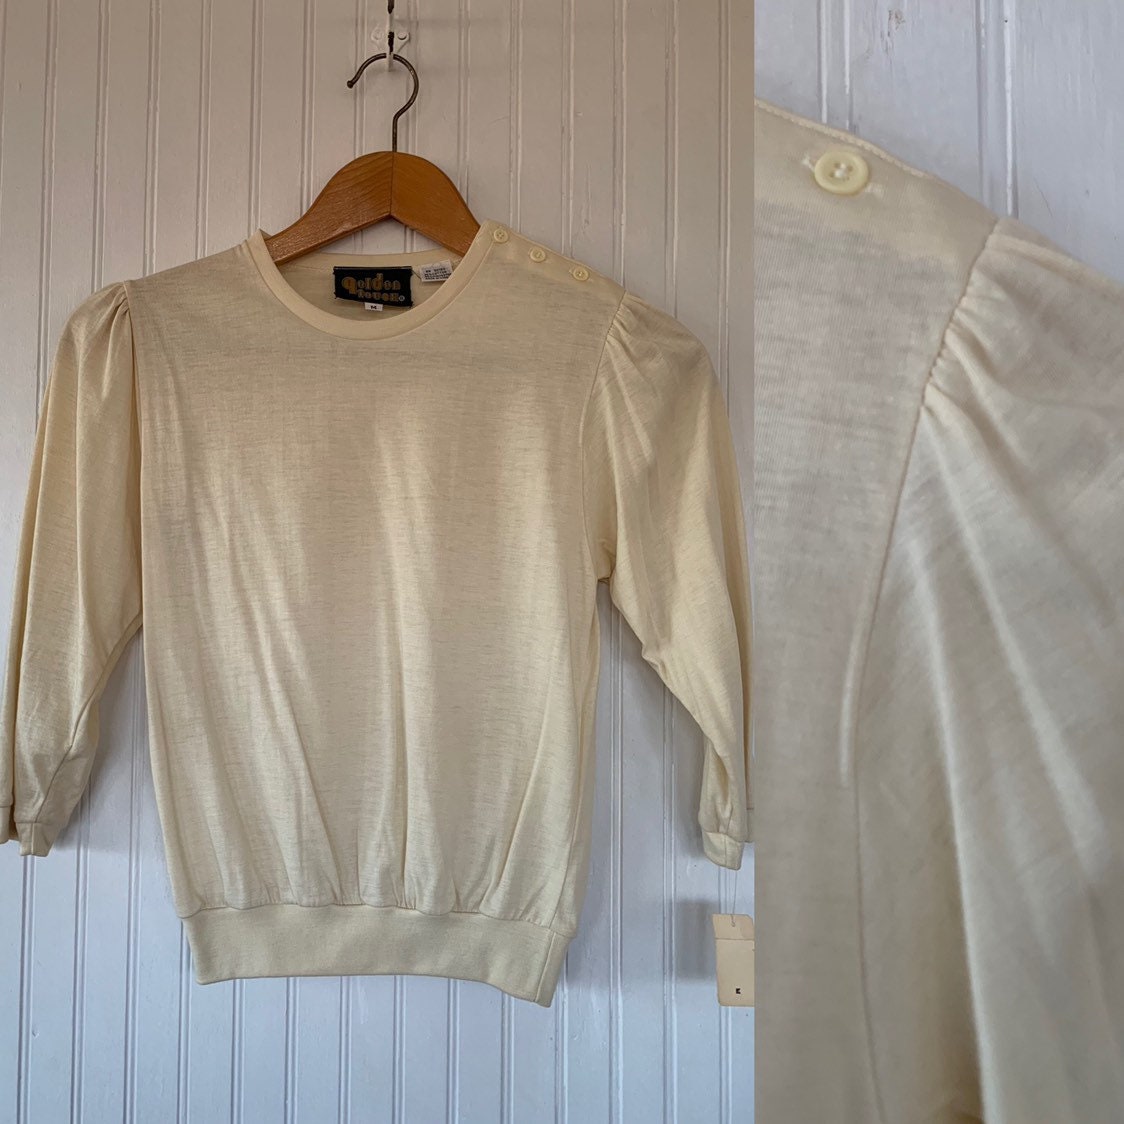 Unique Vintage 70s 80s Ivory Off White Puff Sleeve Top Shirt Medium ...